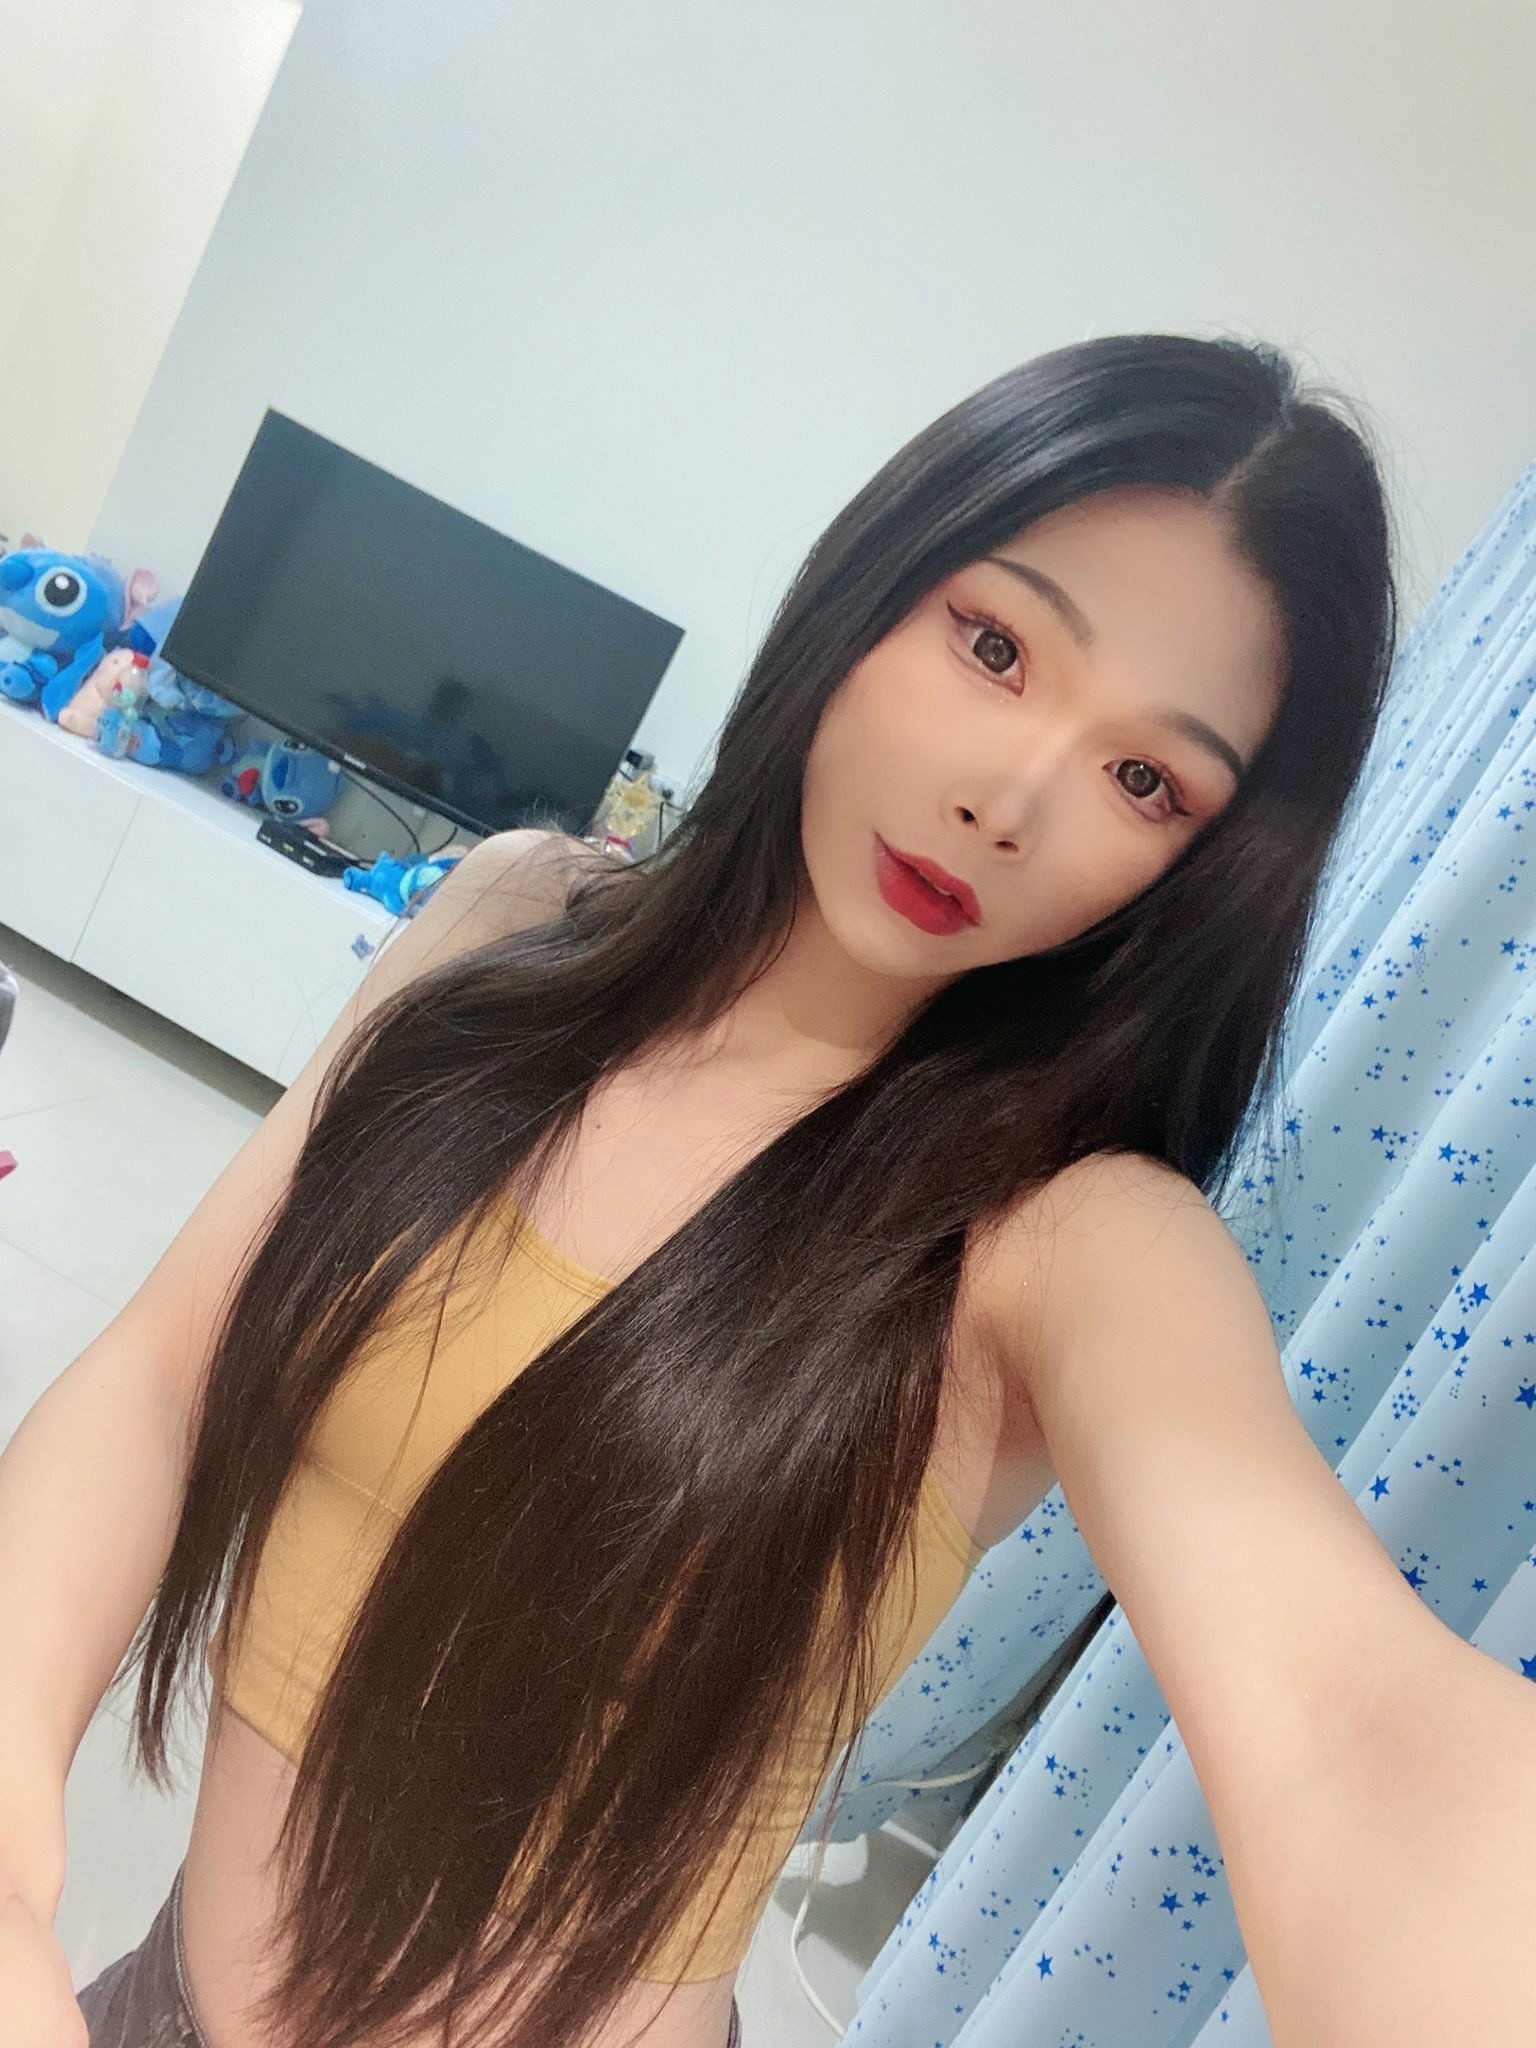 Photo by romaintranquille with the username @romaintranquille,  May 30, 2022 at 11:28 PM. The post is about the topic Chinese crossdressers and the text says 'Her Twitter username is ring273 and she's adorable #ChineseTS #AsianTS #Trans'